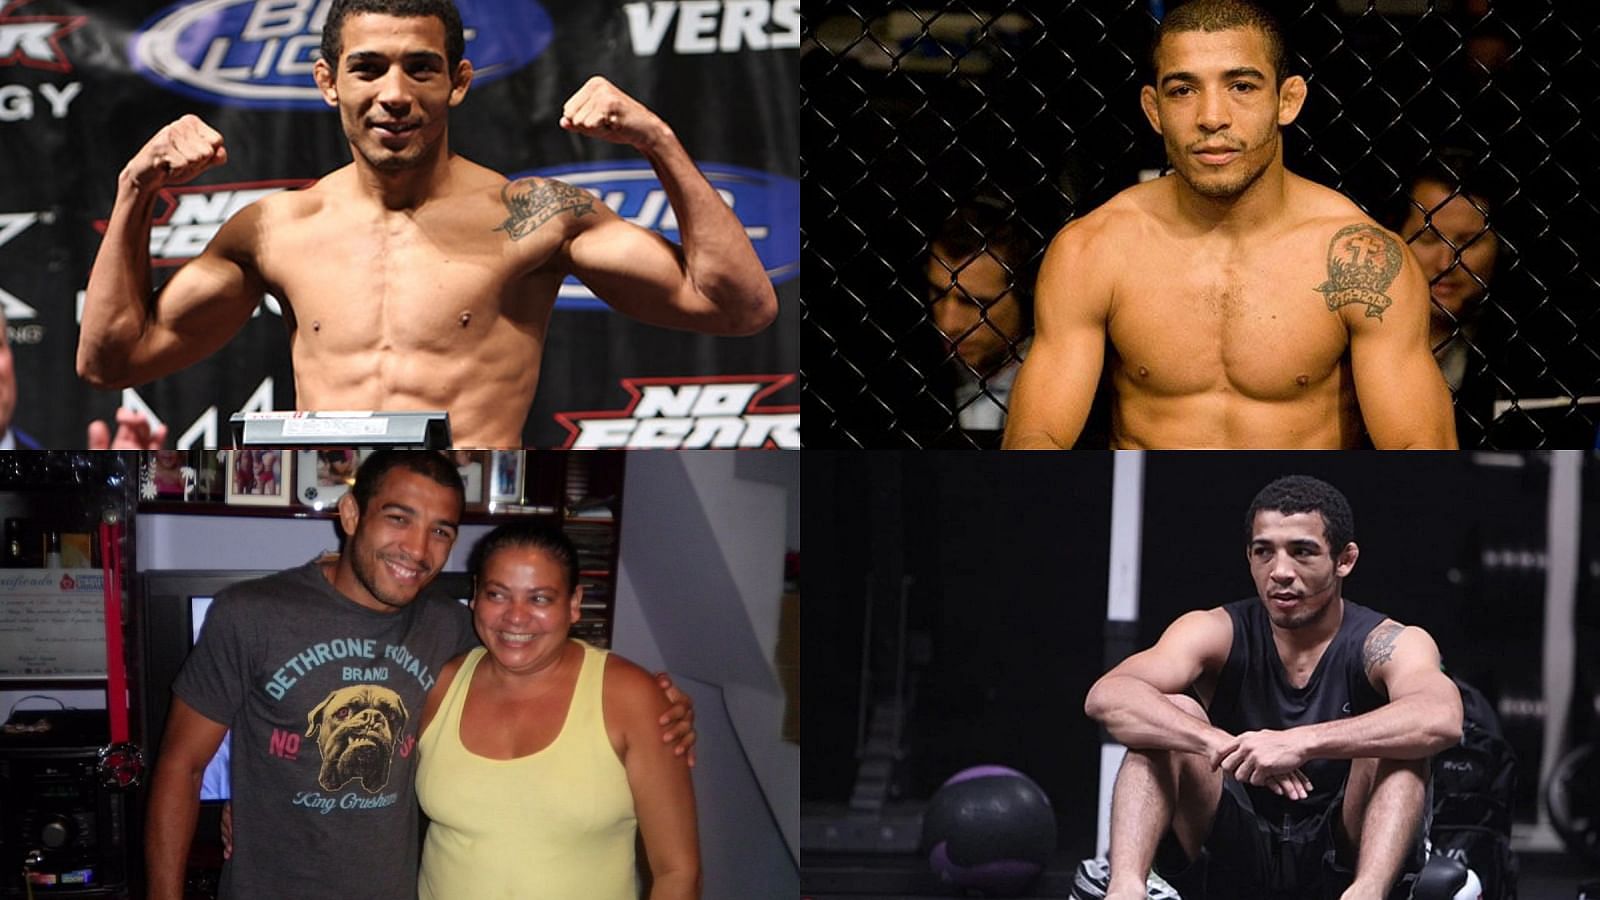 How were José Aldo’s Early Life, Marriage, and Children?